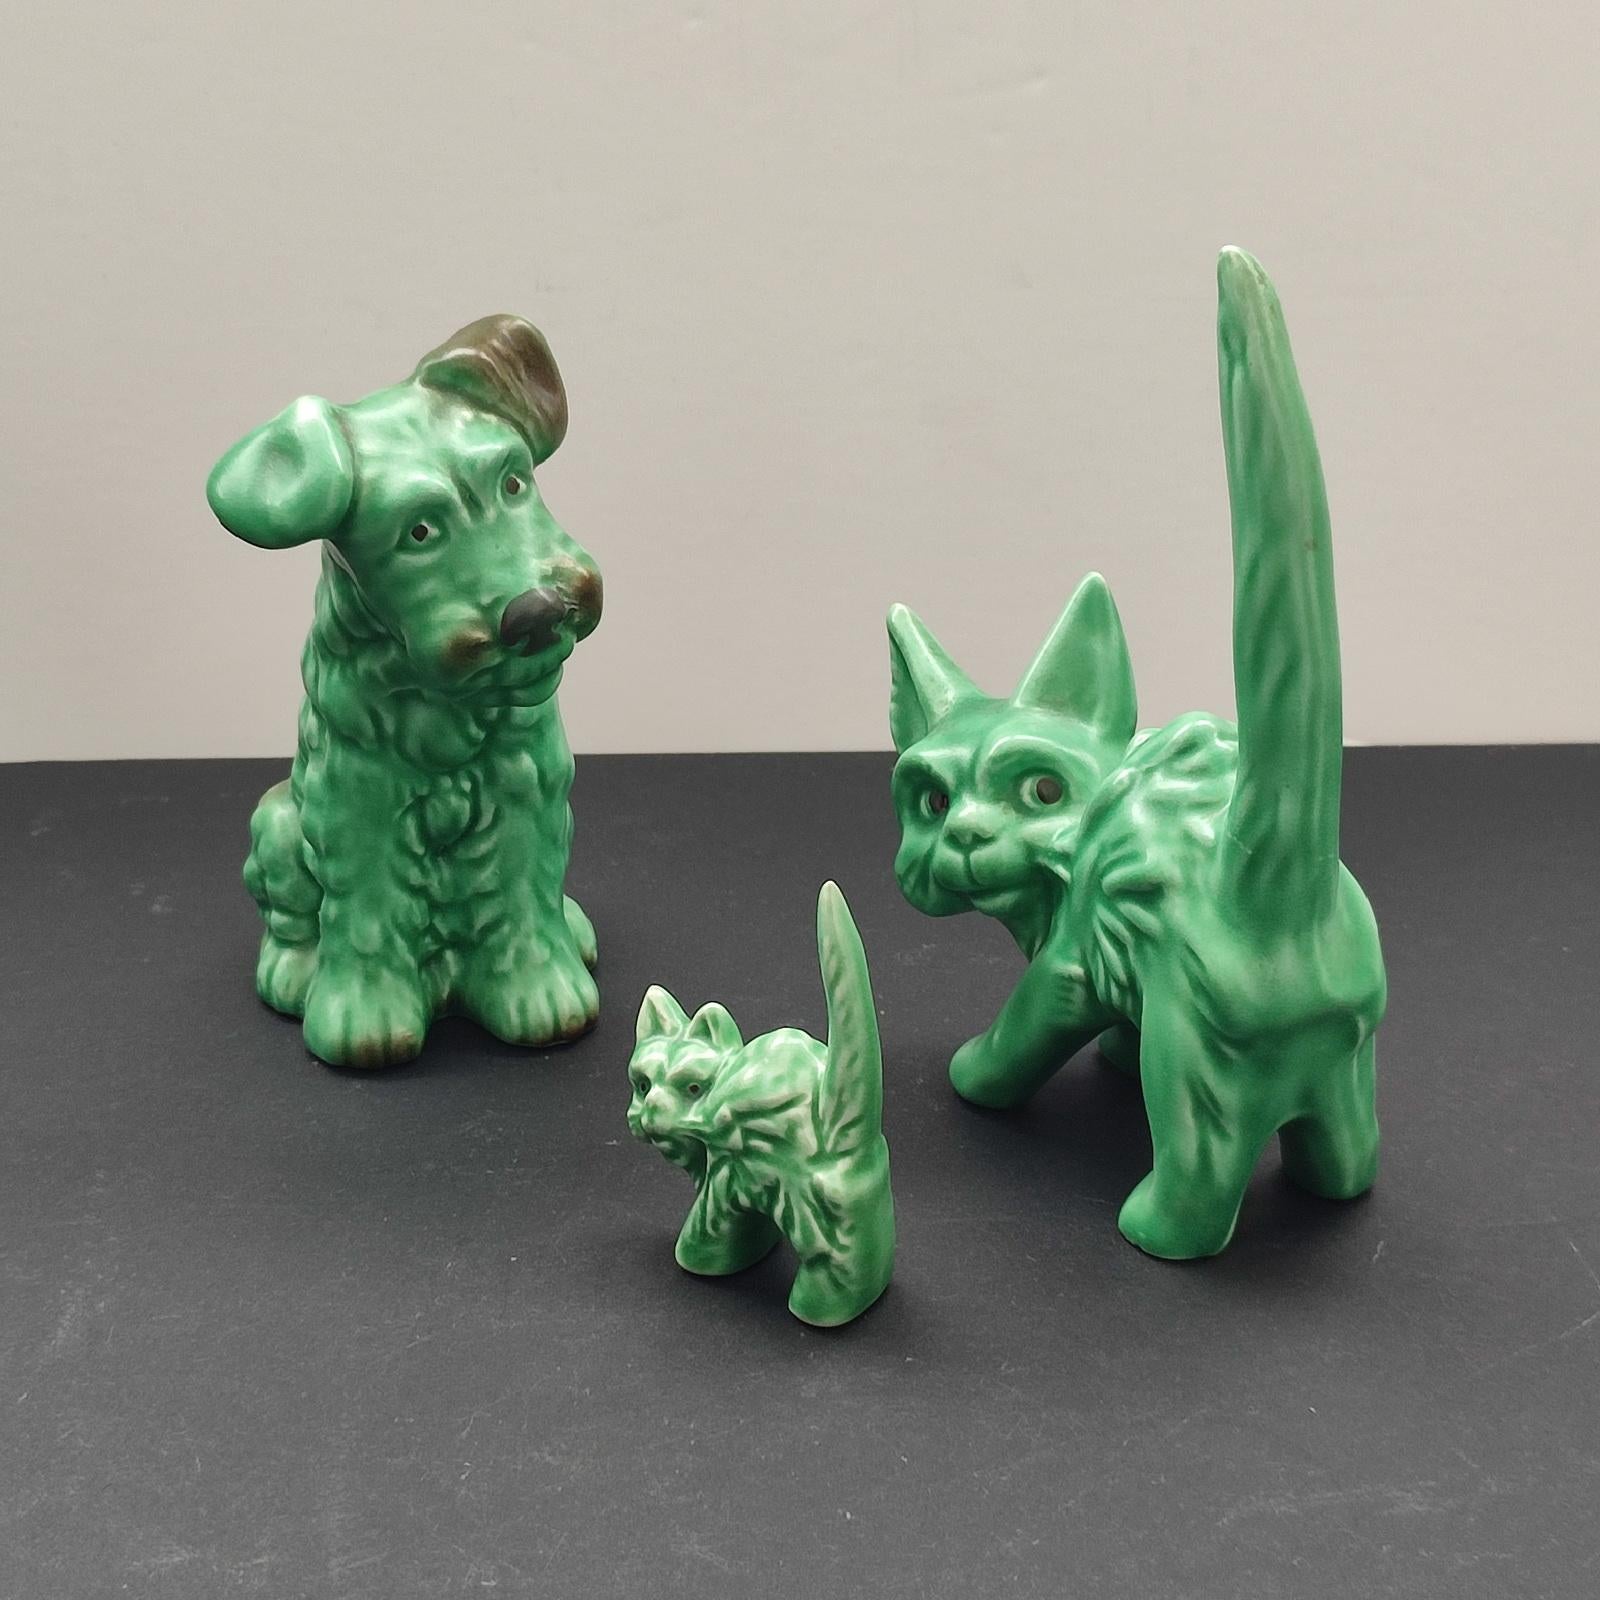 English Art Deco Set of 3 Collectible Green Ceramic Figurines, England, 1930s For Sale